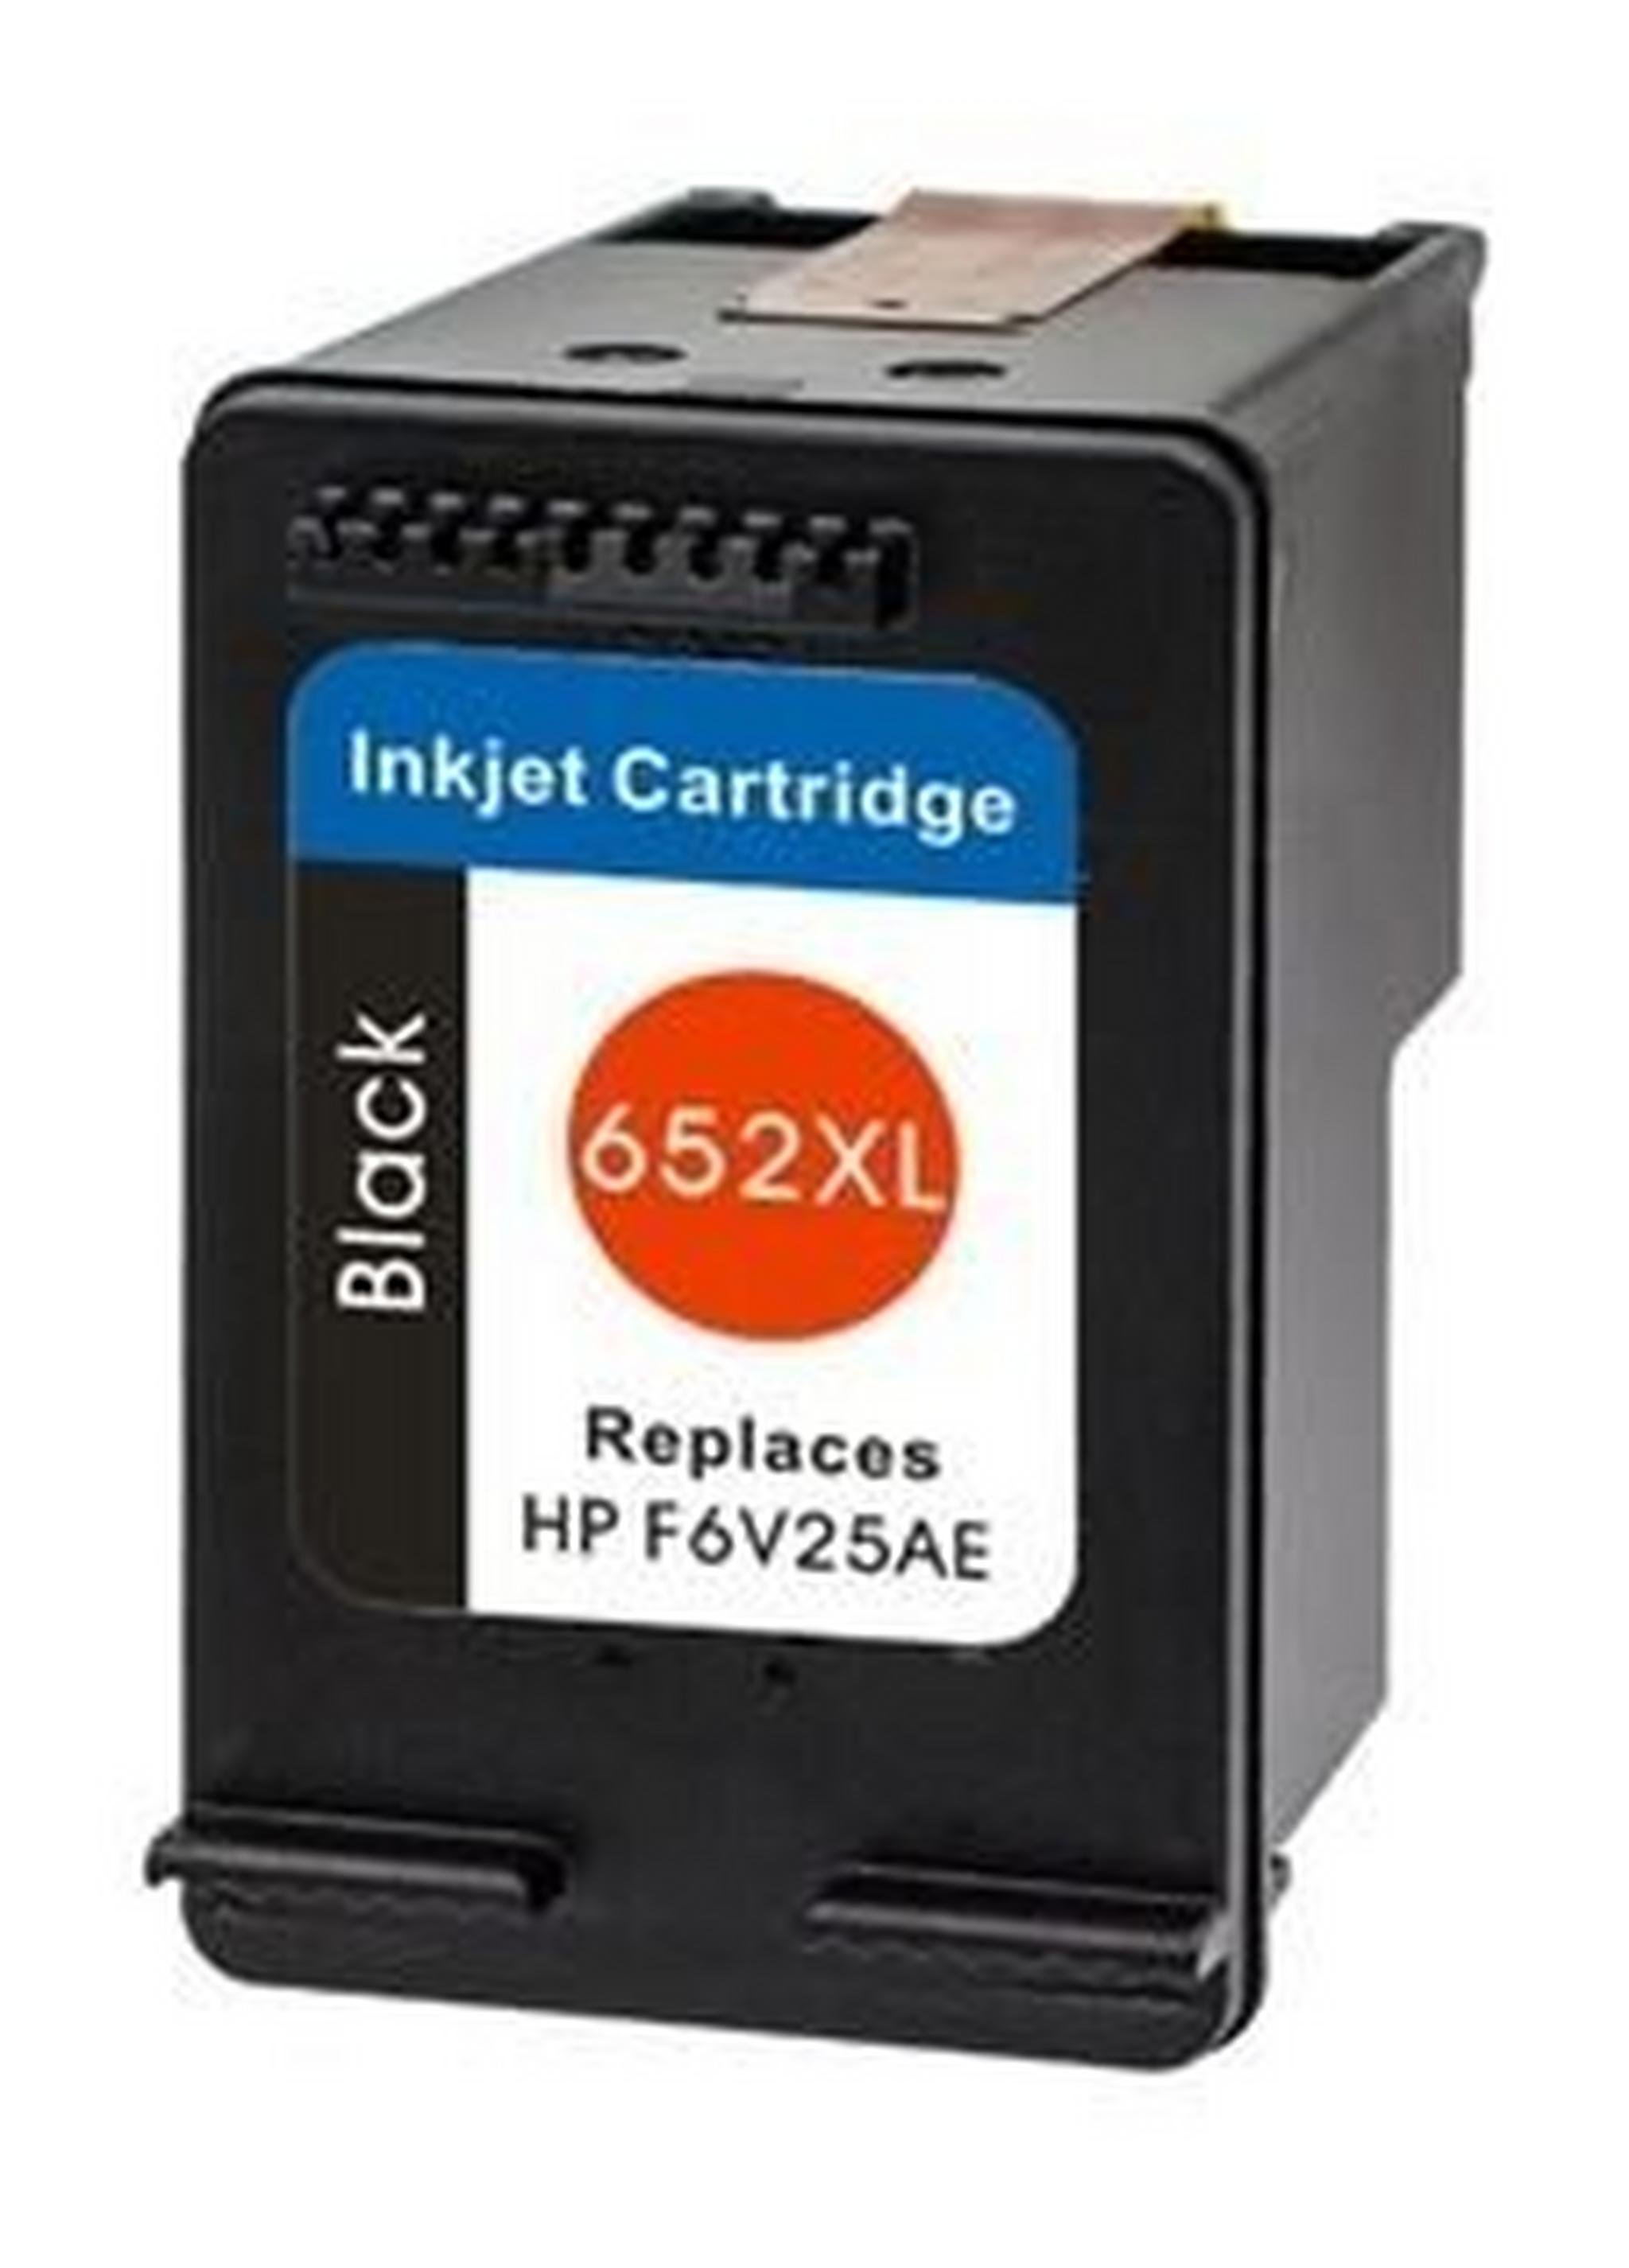 AnyColor 652XL Black Inkjet 800 Page Yield Printer Cartridge - F6V25AE